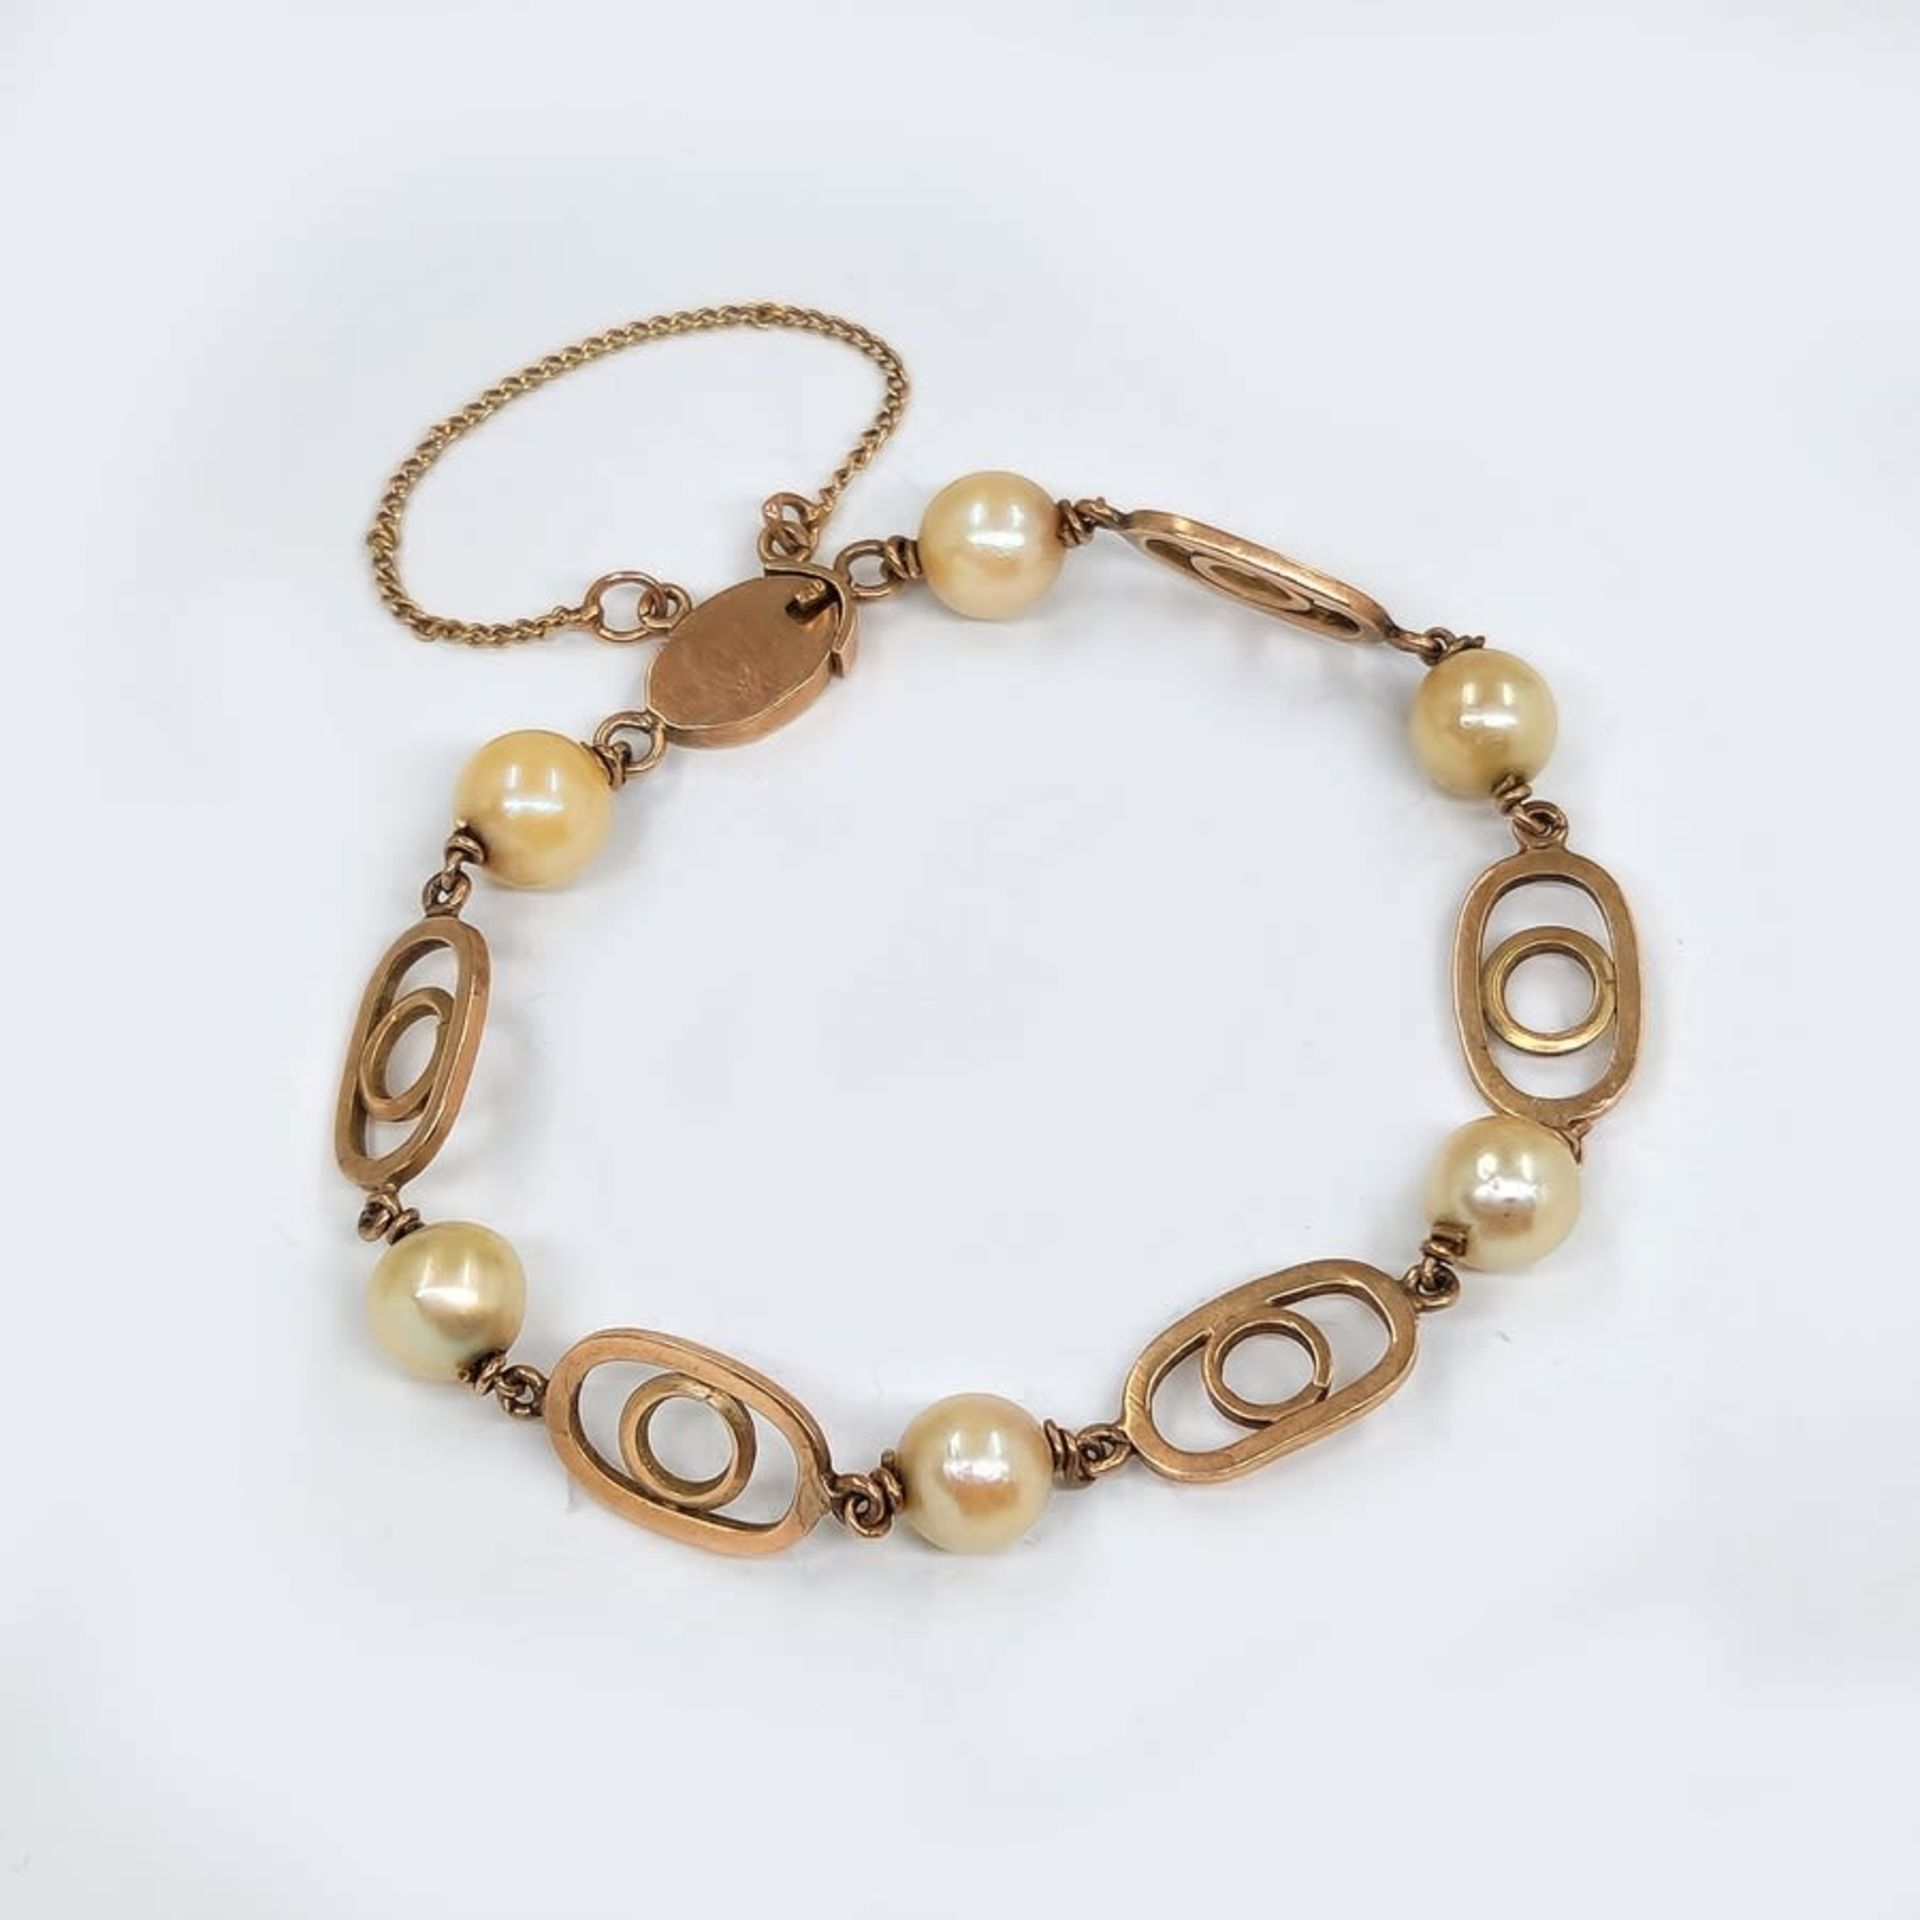 An antique bracelet of 14K yellow gold with pearls, not signed but the purity of the gold has been